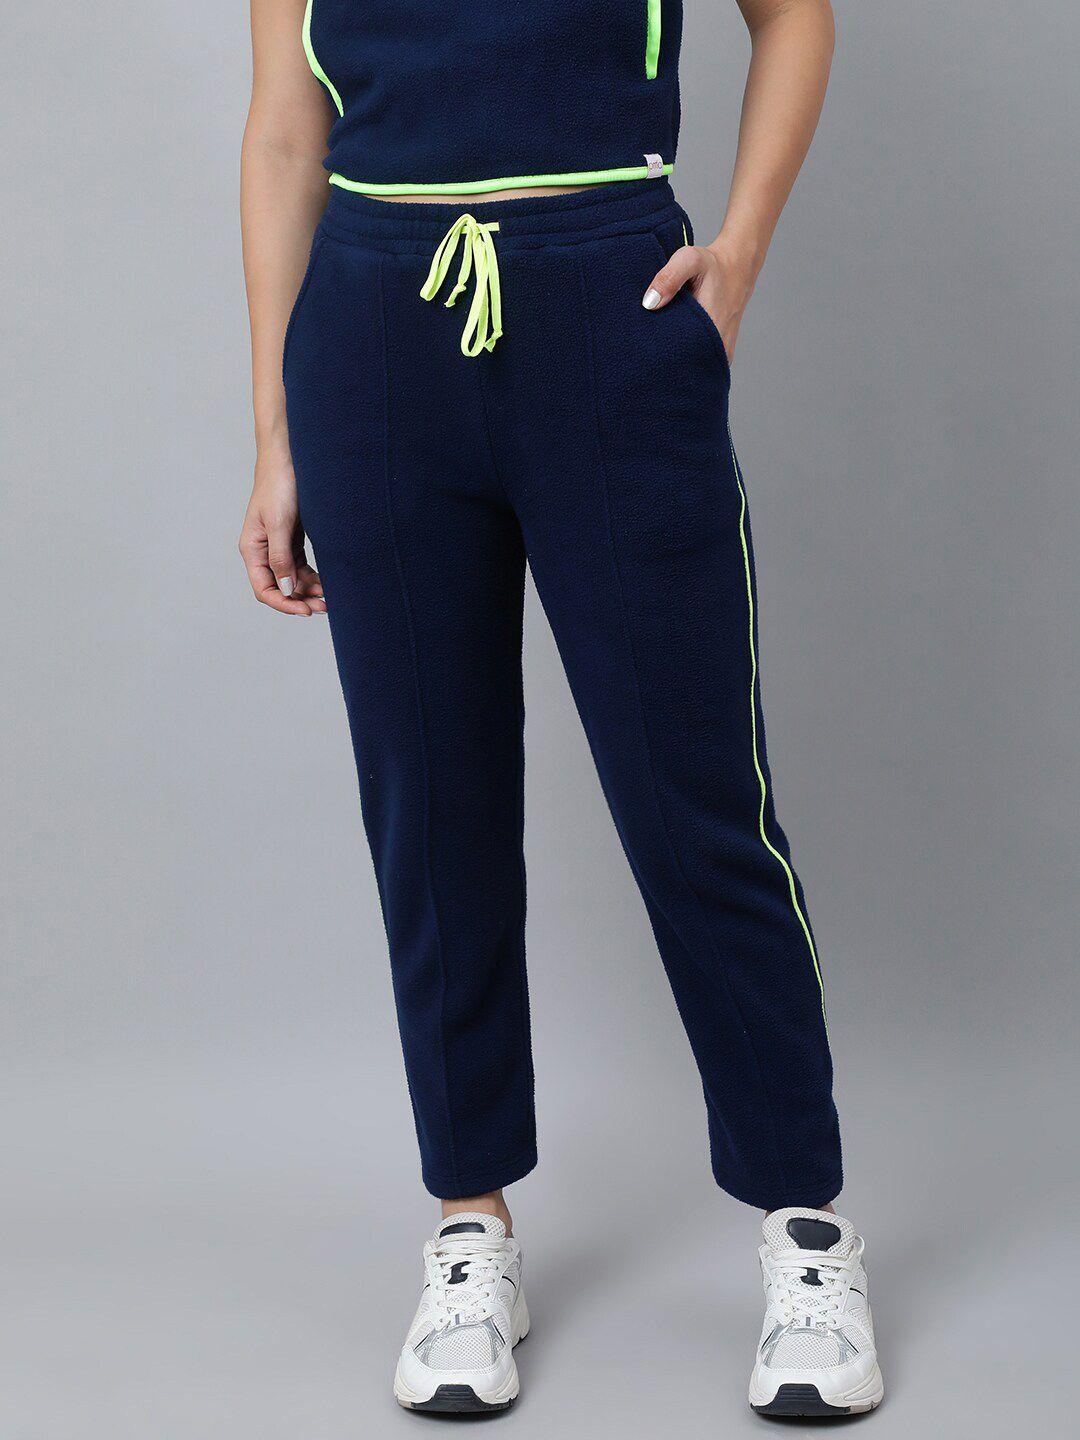 pritla women navy blue and lime green solid joggers